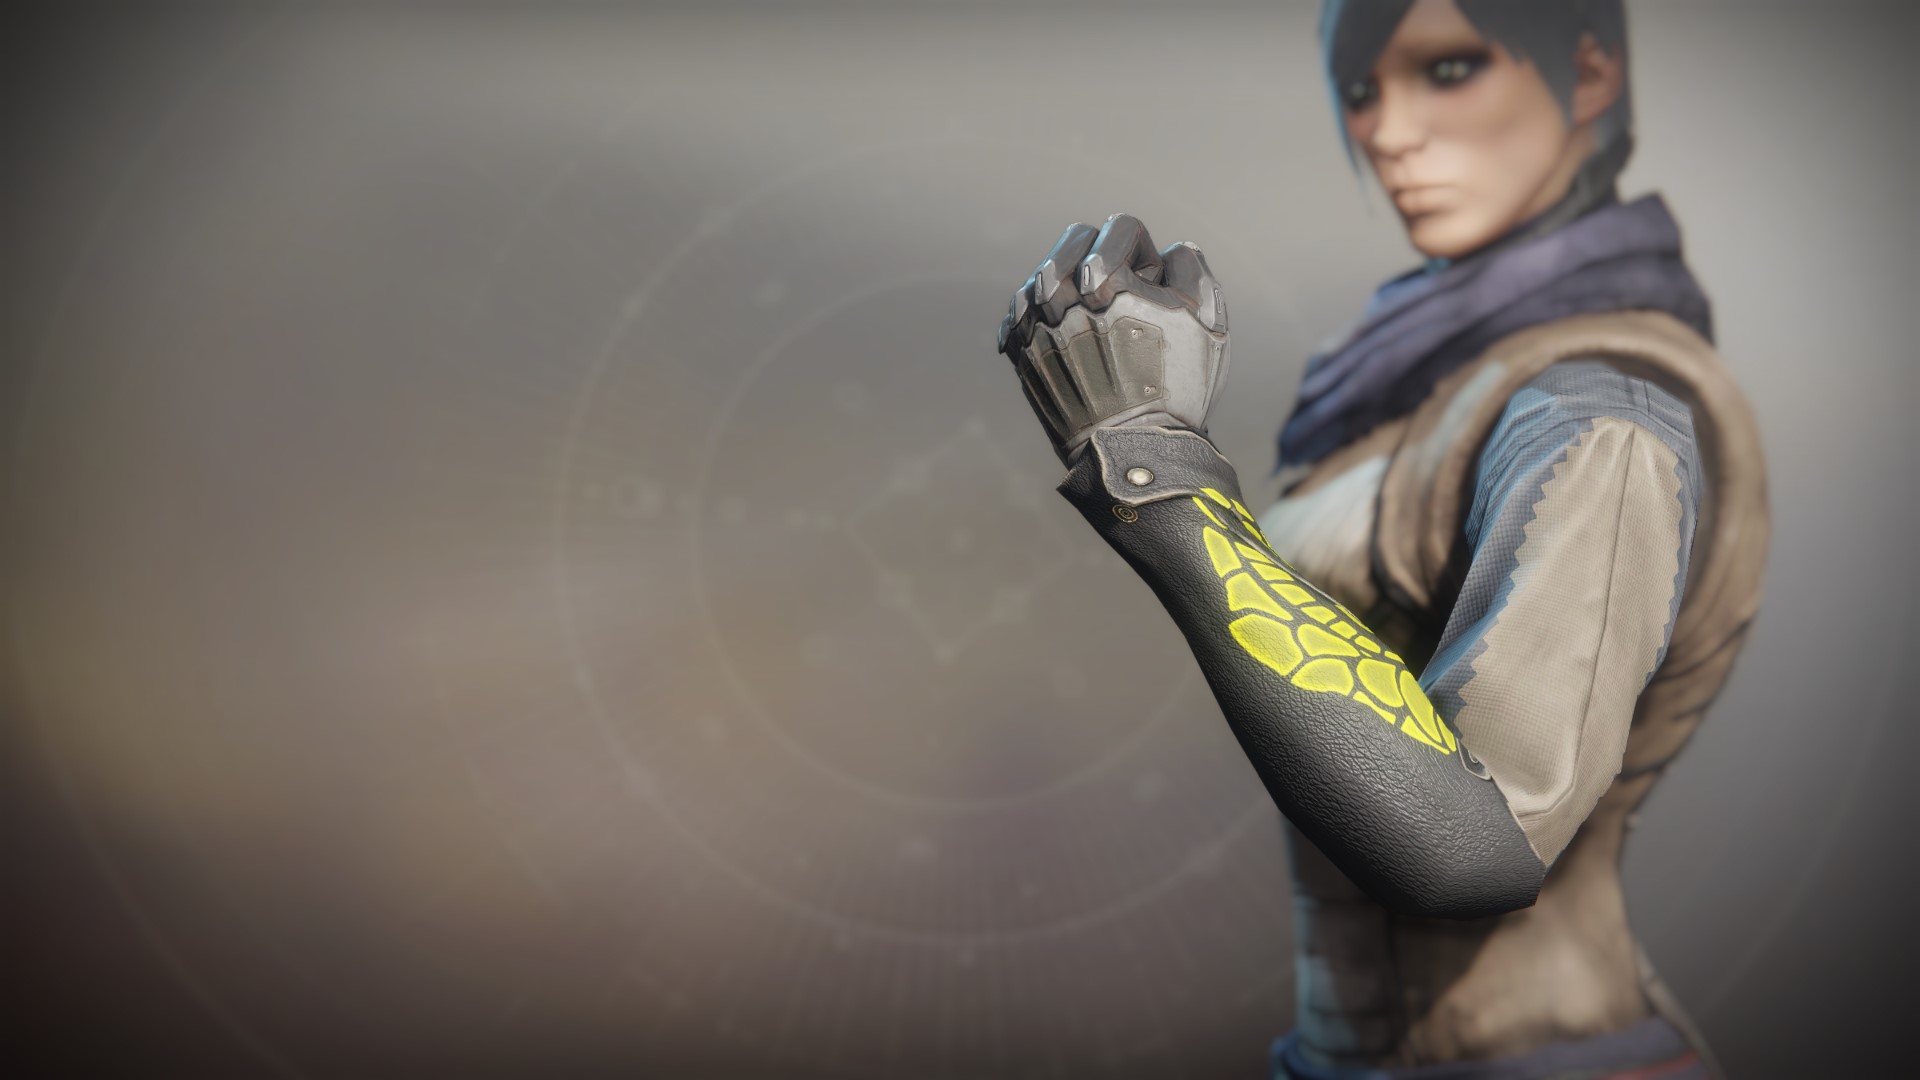 An in-game render of the Illicit Sentry Grips.